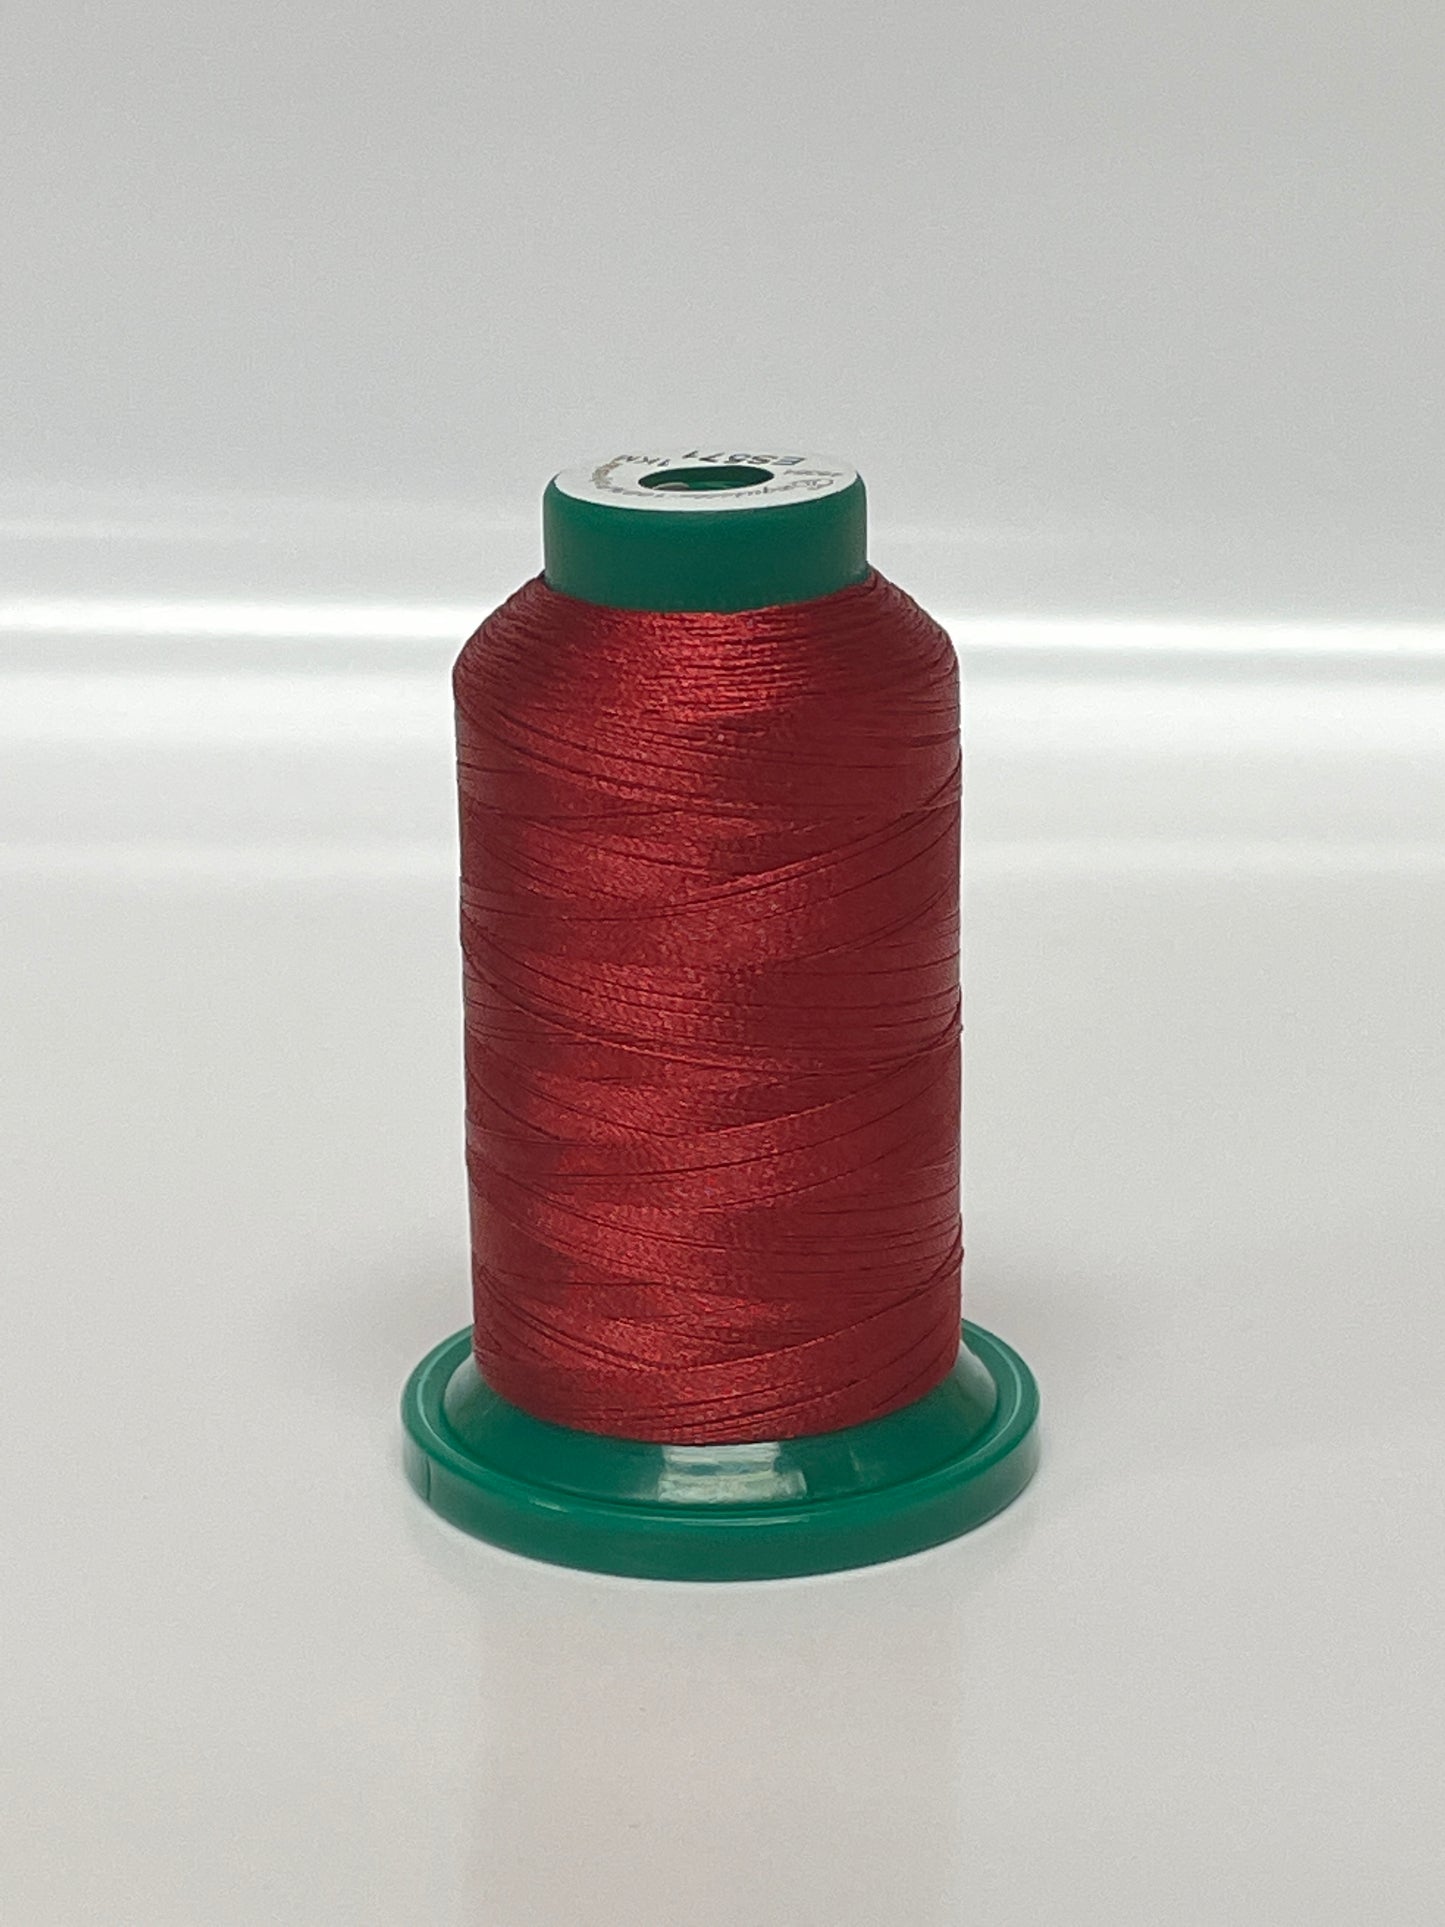 Exquisite Embroidery Threads - Reds